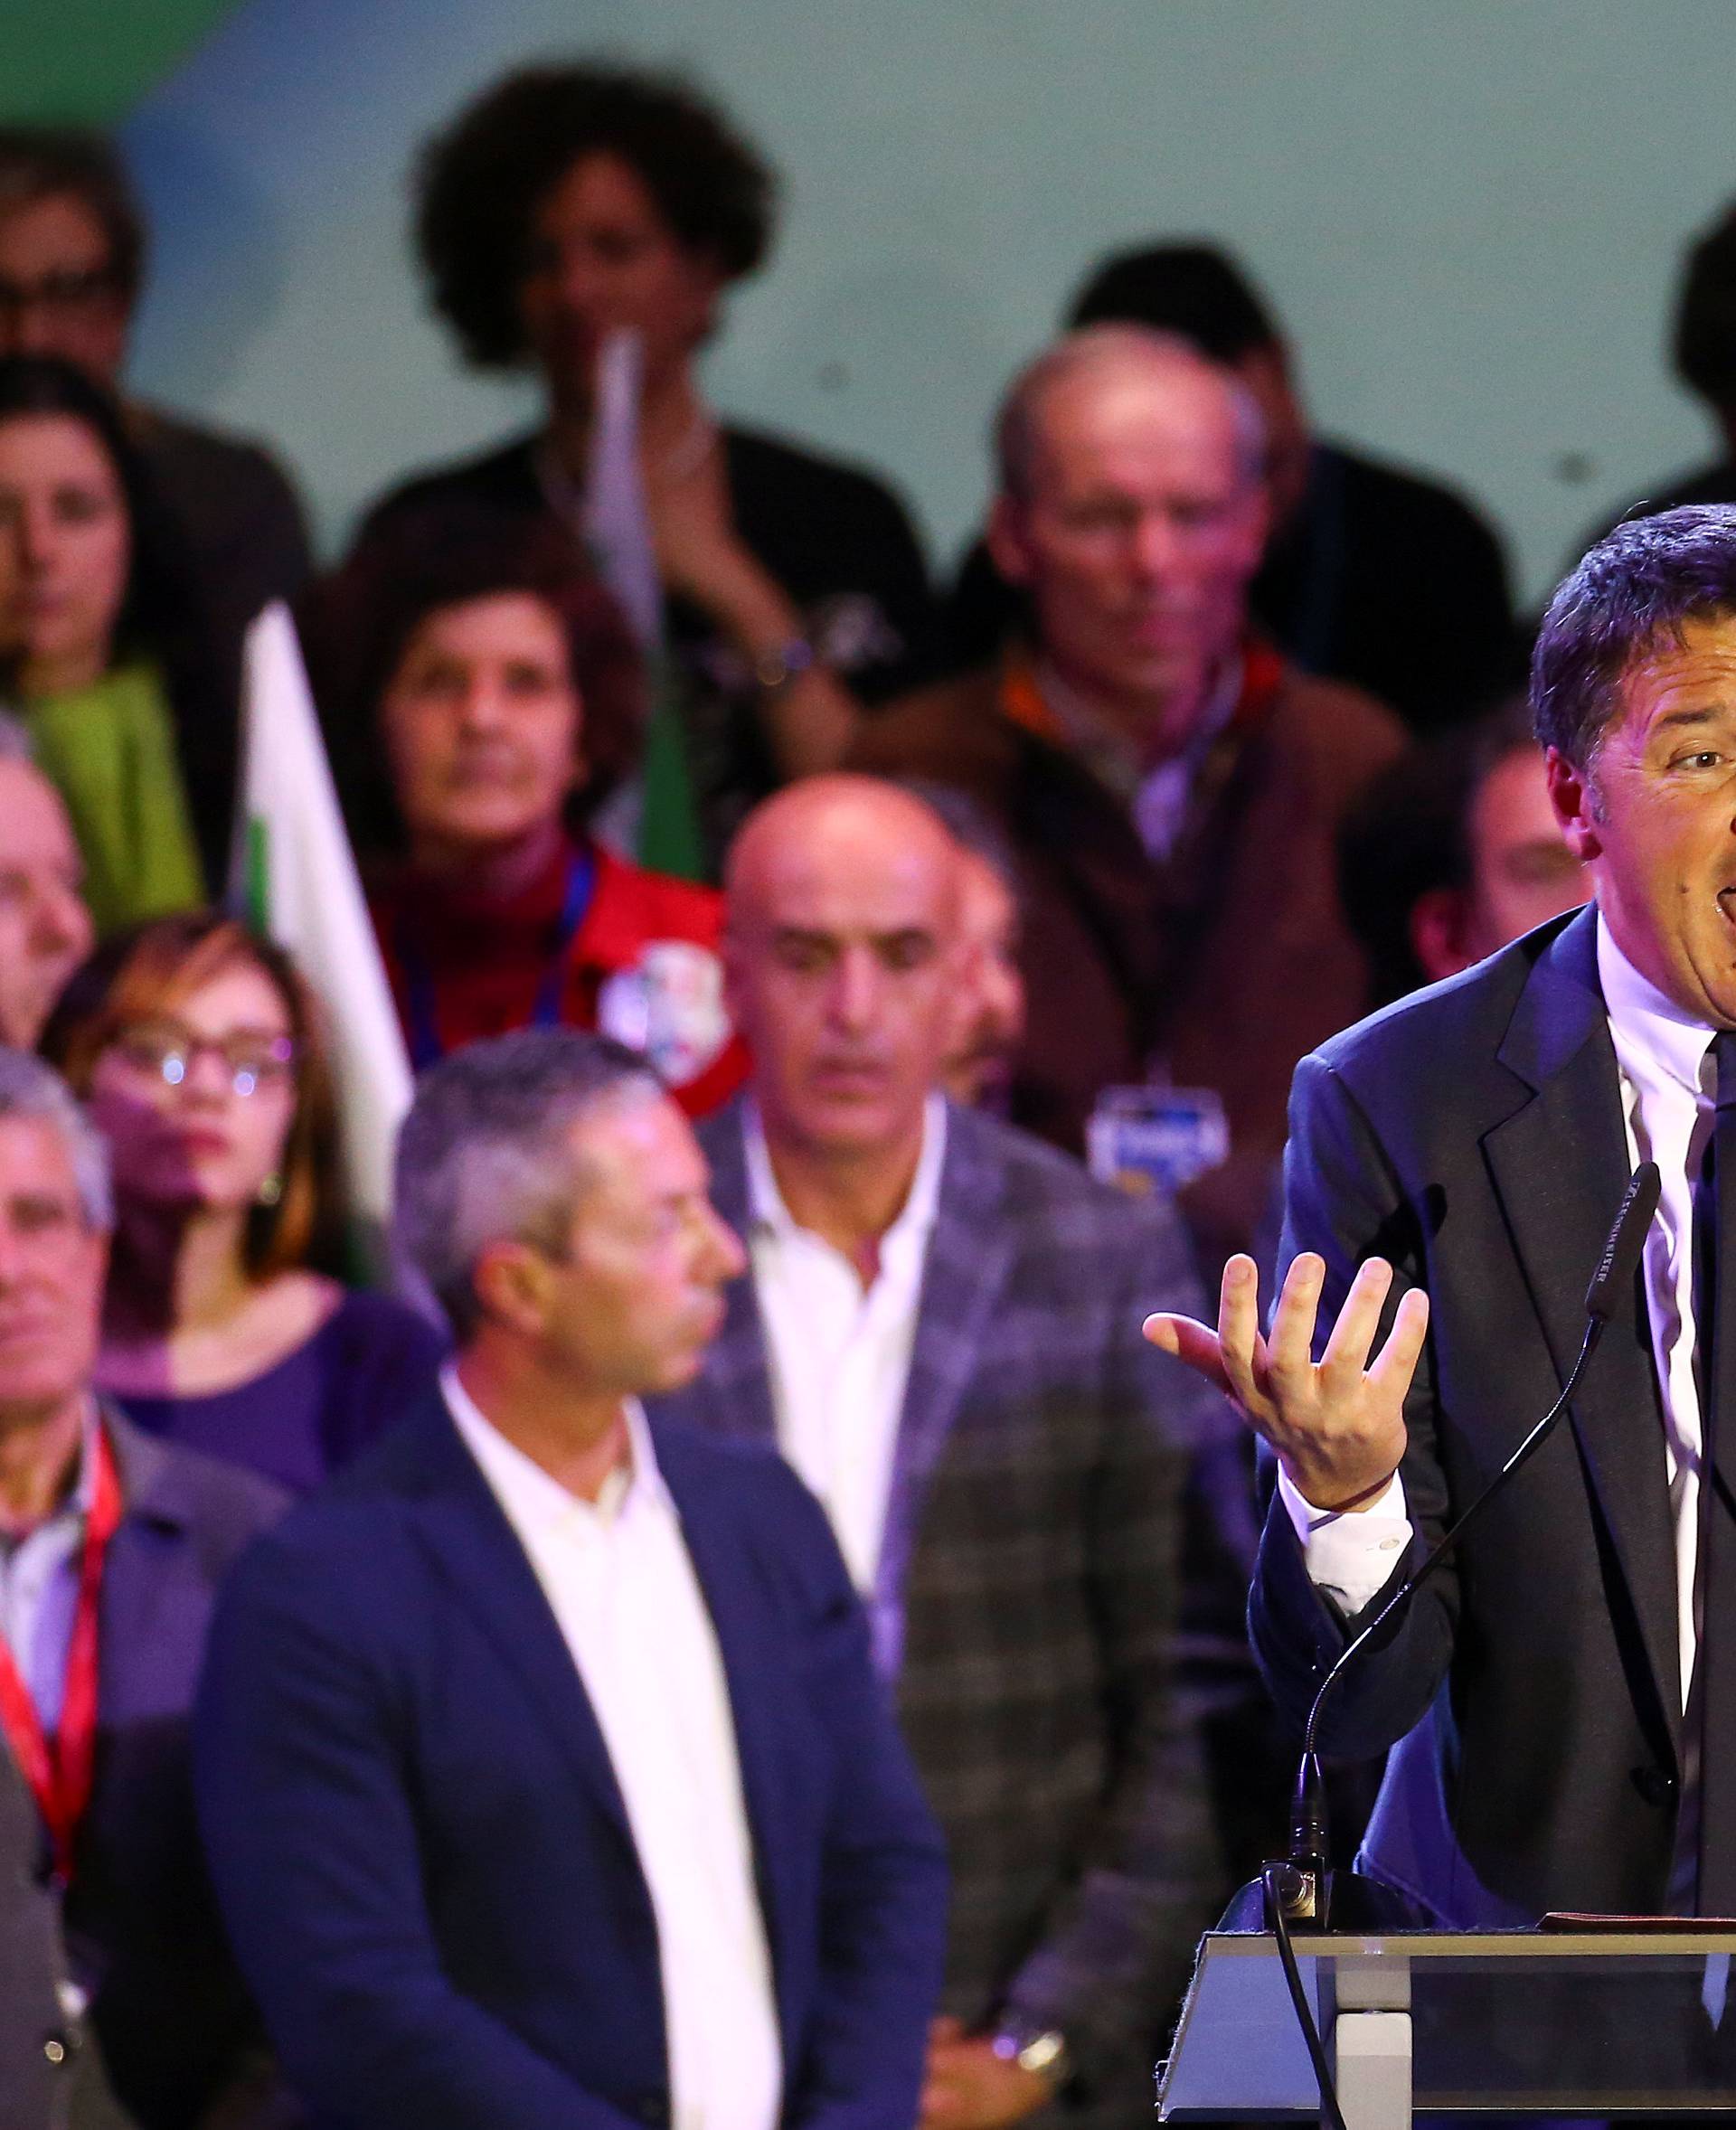 Democratic Party (PD) leader Renzi speaks during the final rally ahead of the March 4 elections in Florence,